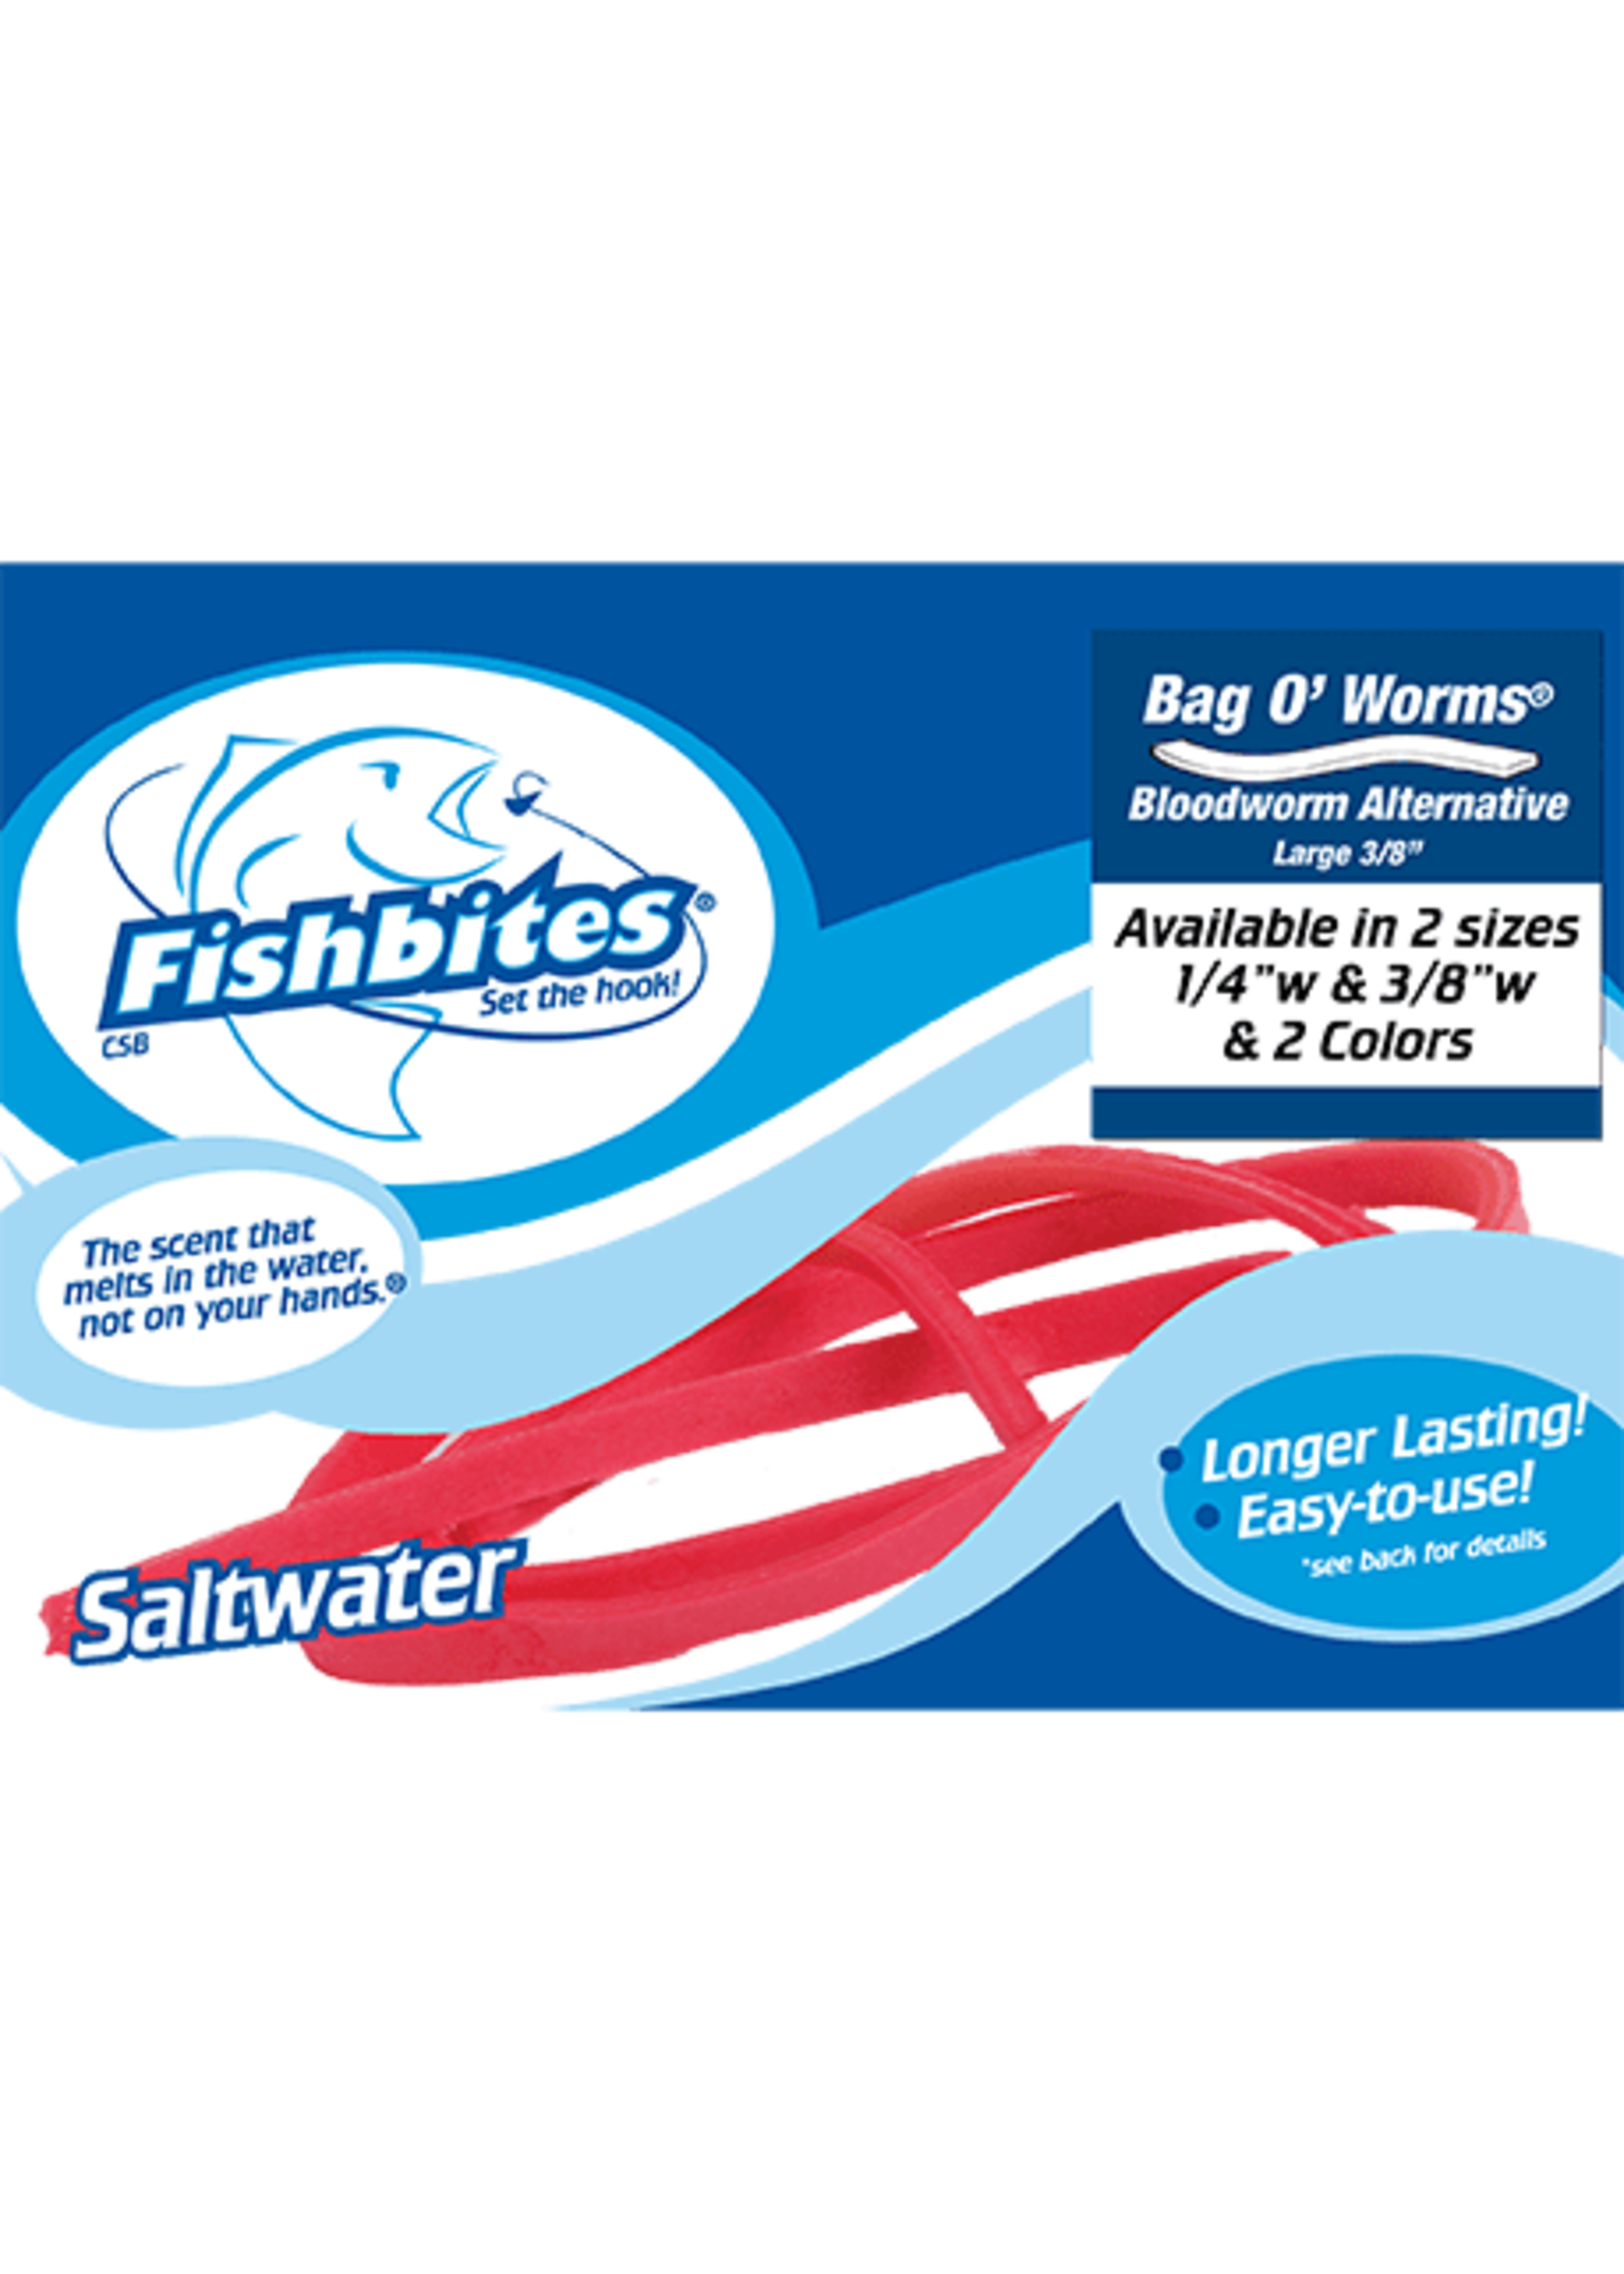 Fishbites Fishbites Bag O' Worms - 3/8" Bloodworm - Long Lasting red